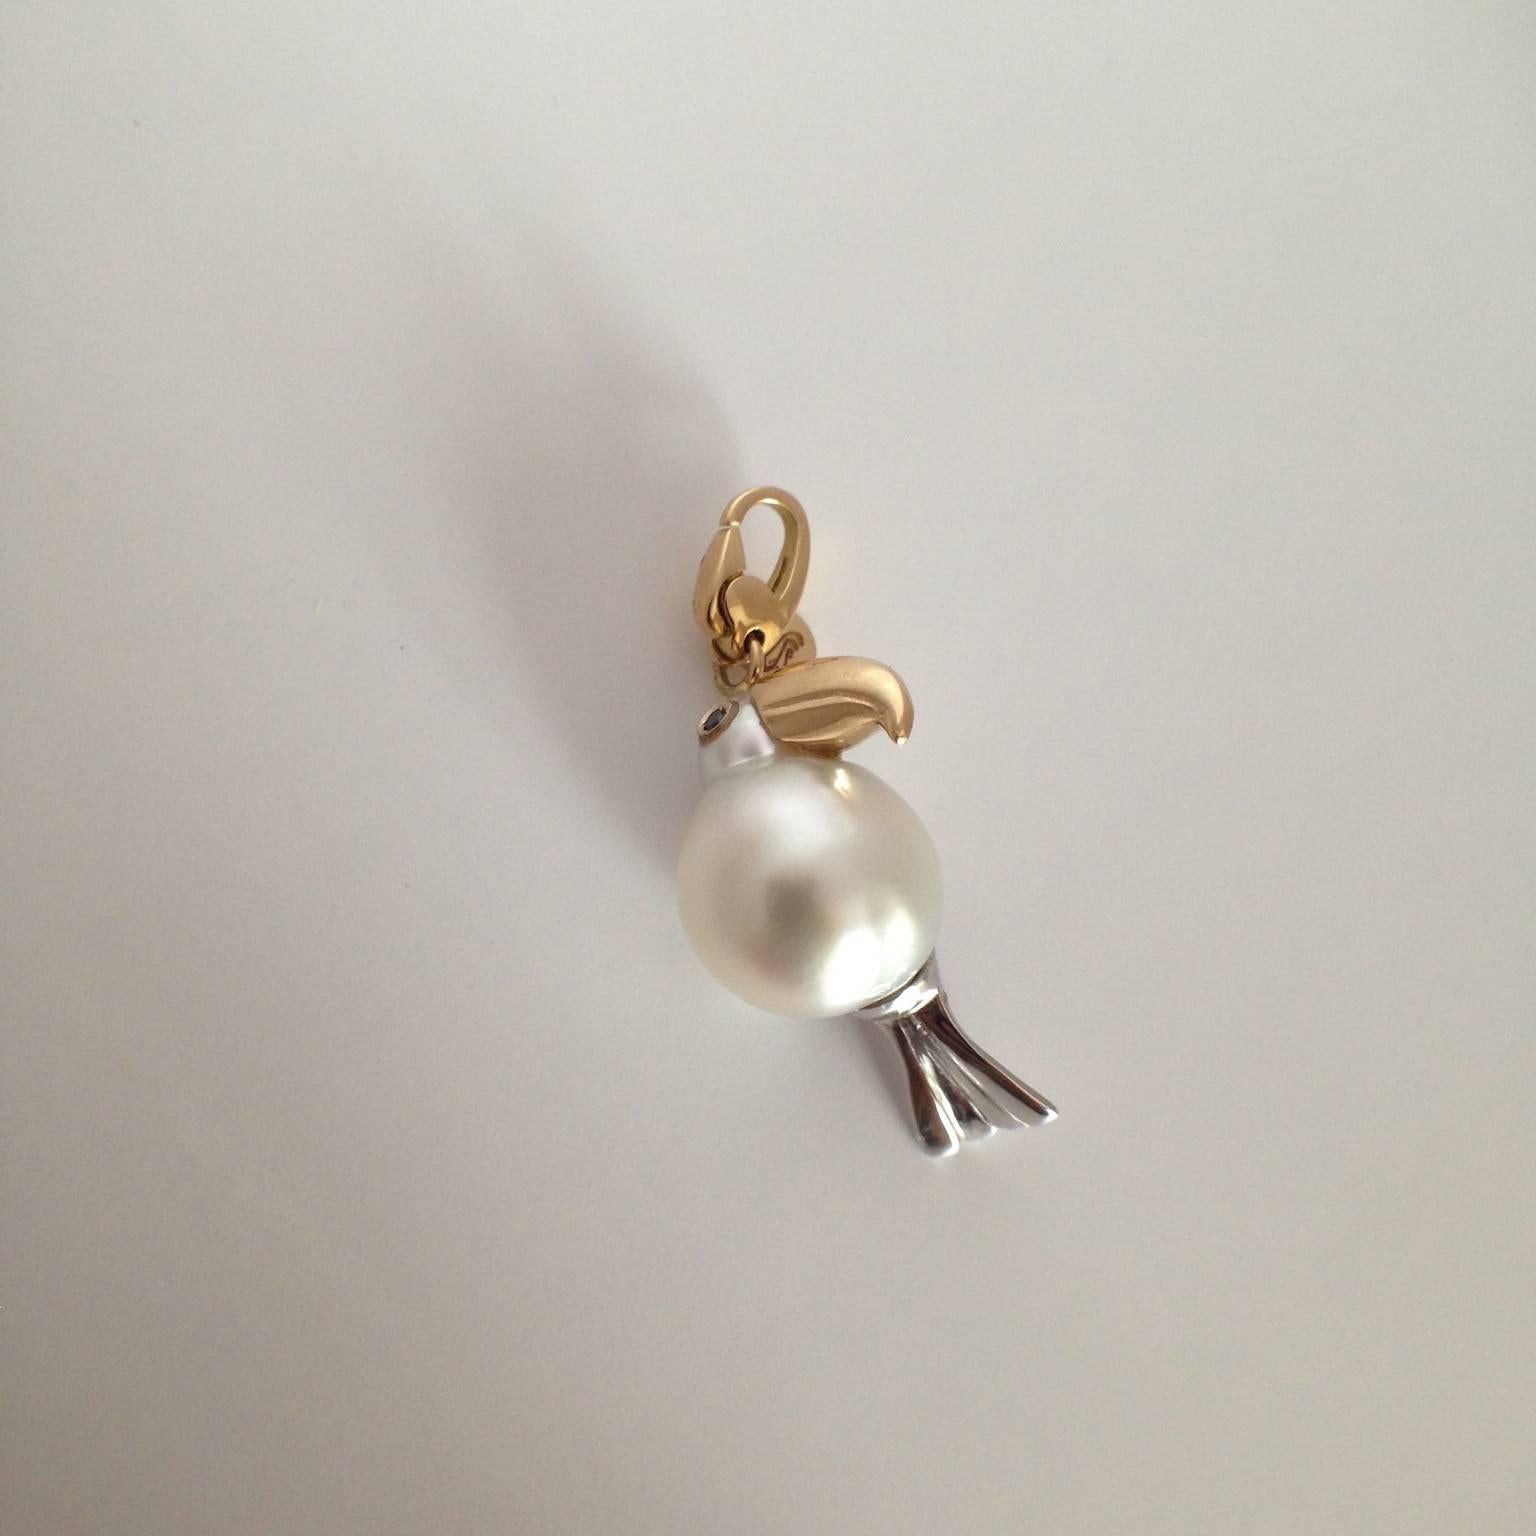 Contemporary Toucan Black Diamond White and Yellow 18Kt Gold Pearl Charm or Pendant Necklace